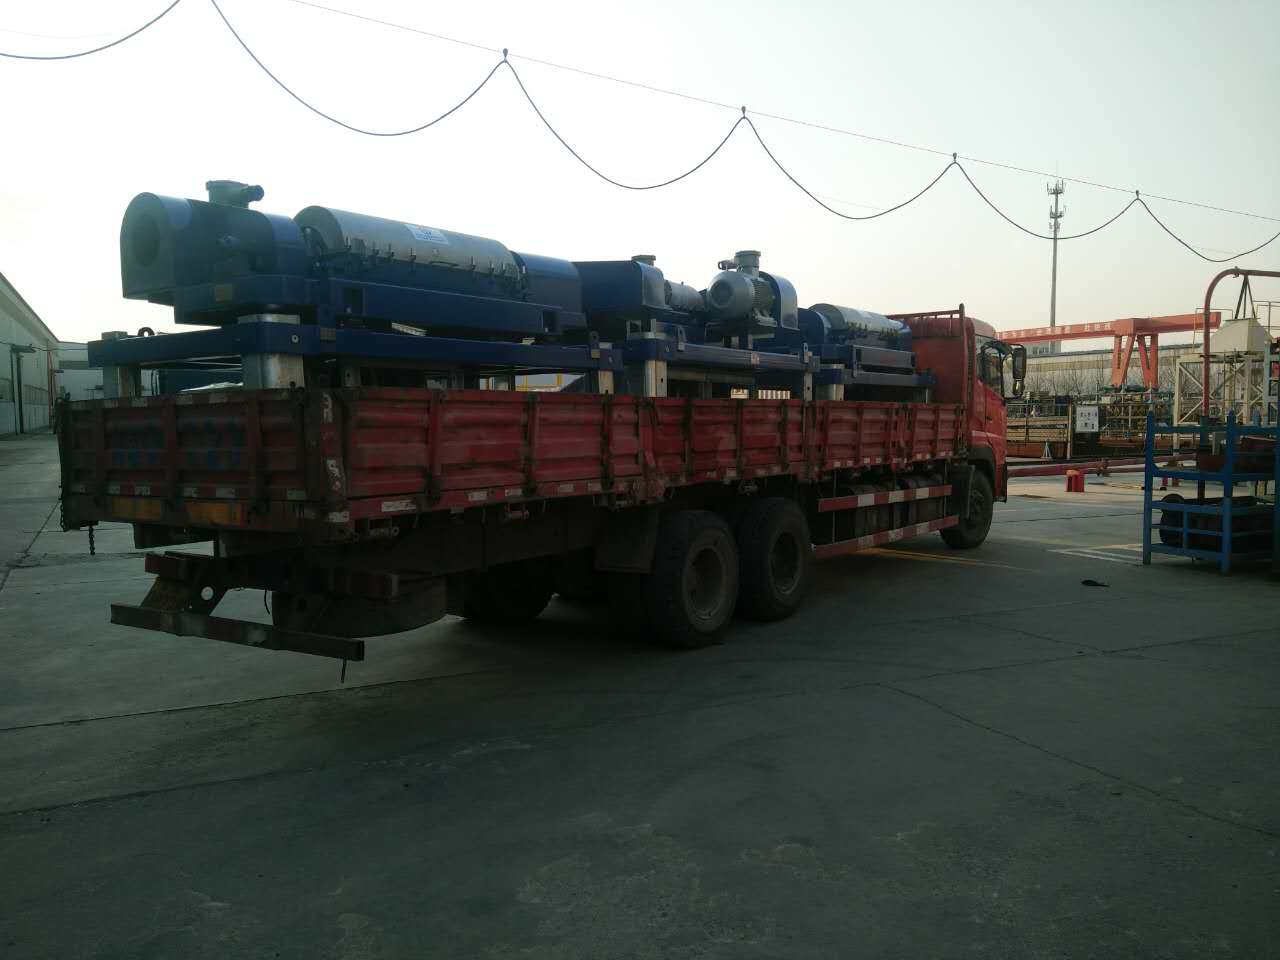  In March 15, 2017, the FDLW450-1250N drilling fluid centrifuge was sent to a drilling team in China